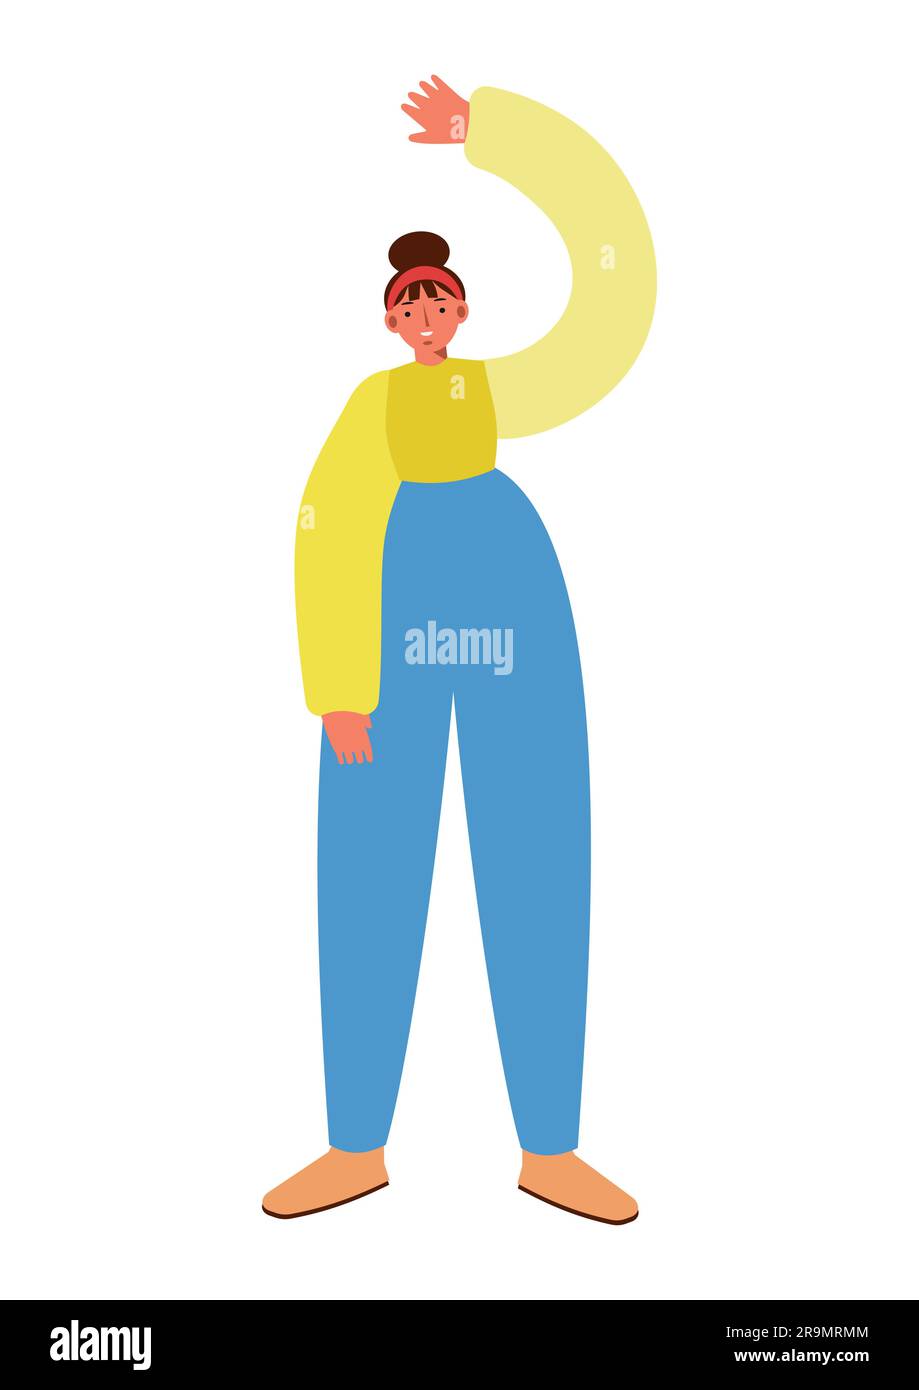 Woman greets by waving her hand, standing pose. Female is wearing pants and long-sleeve jacket. Distorted proportions style, isolated vector illustrat Stock Vector